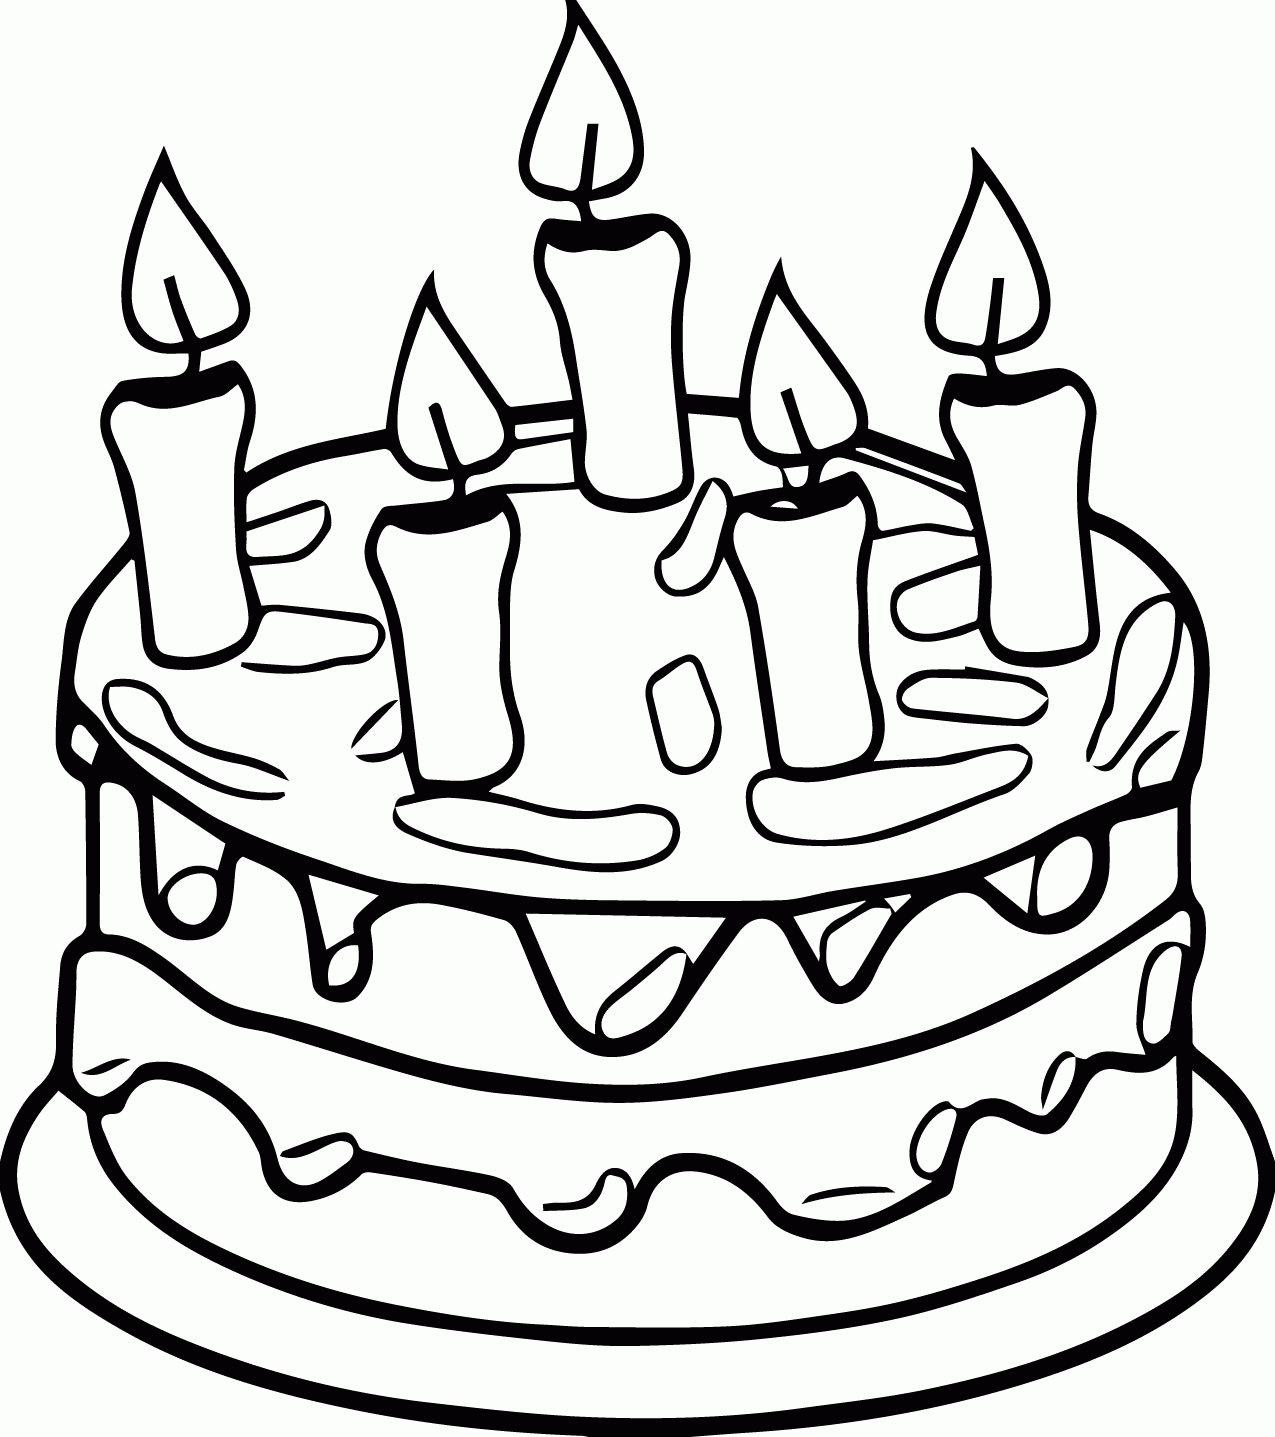 Cake Coloring Page Coloring Home